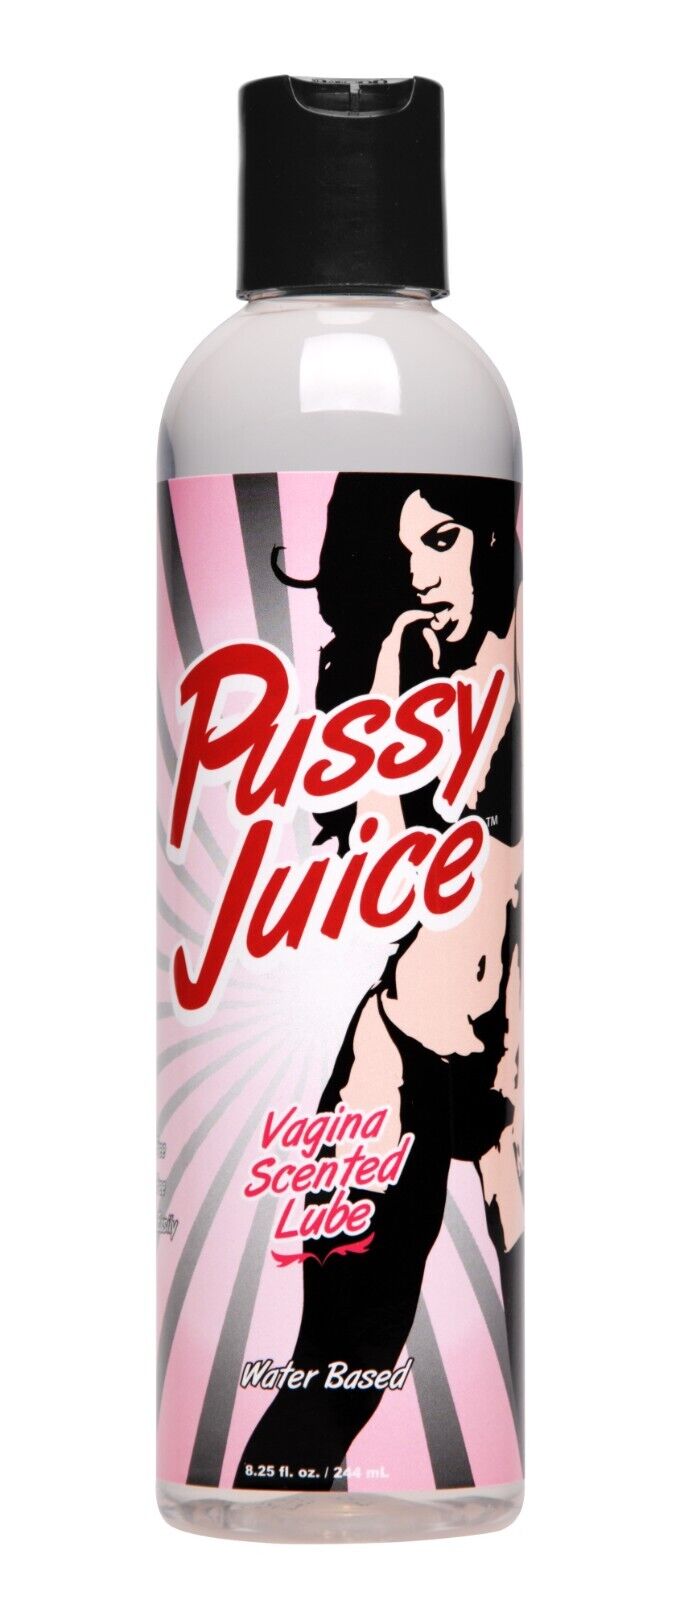 delores warren recommends pussy juice pic pic